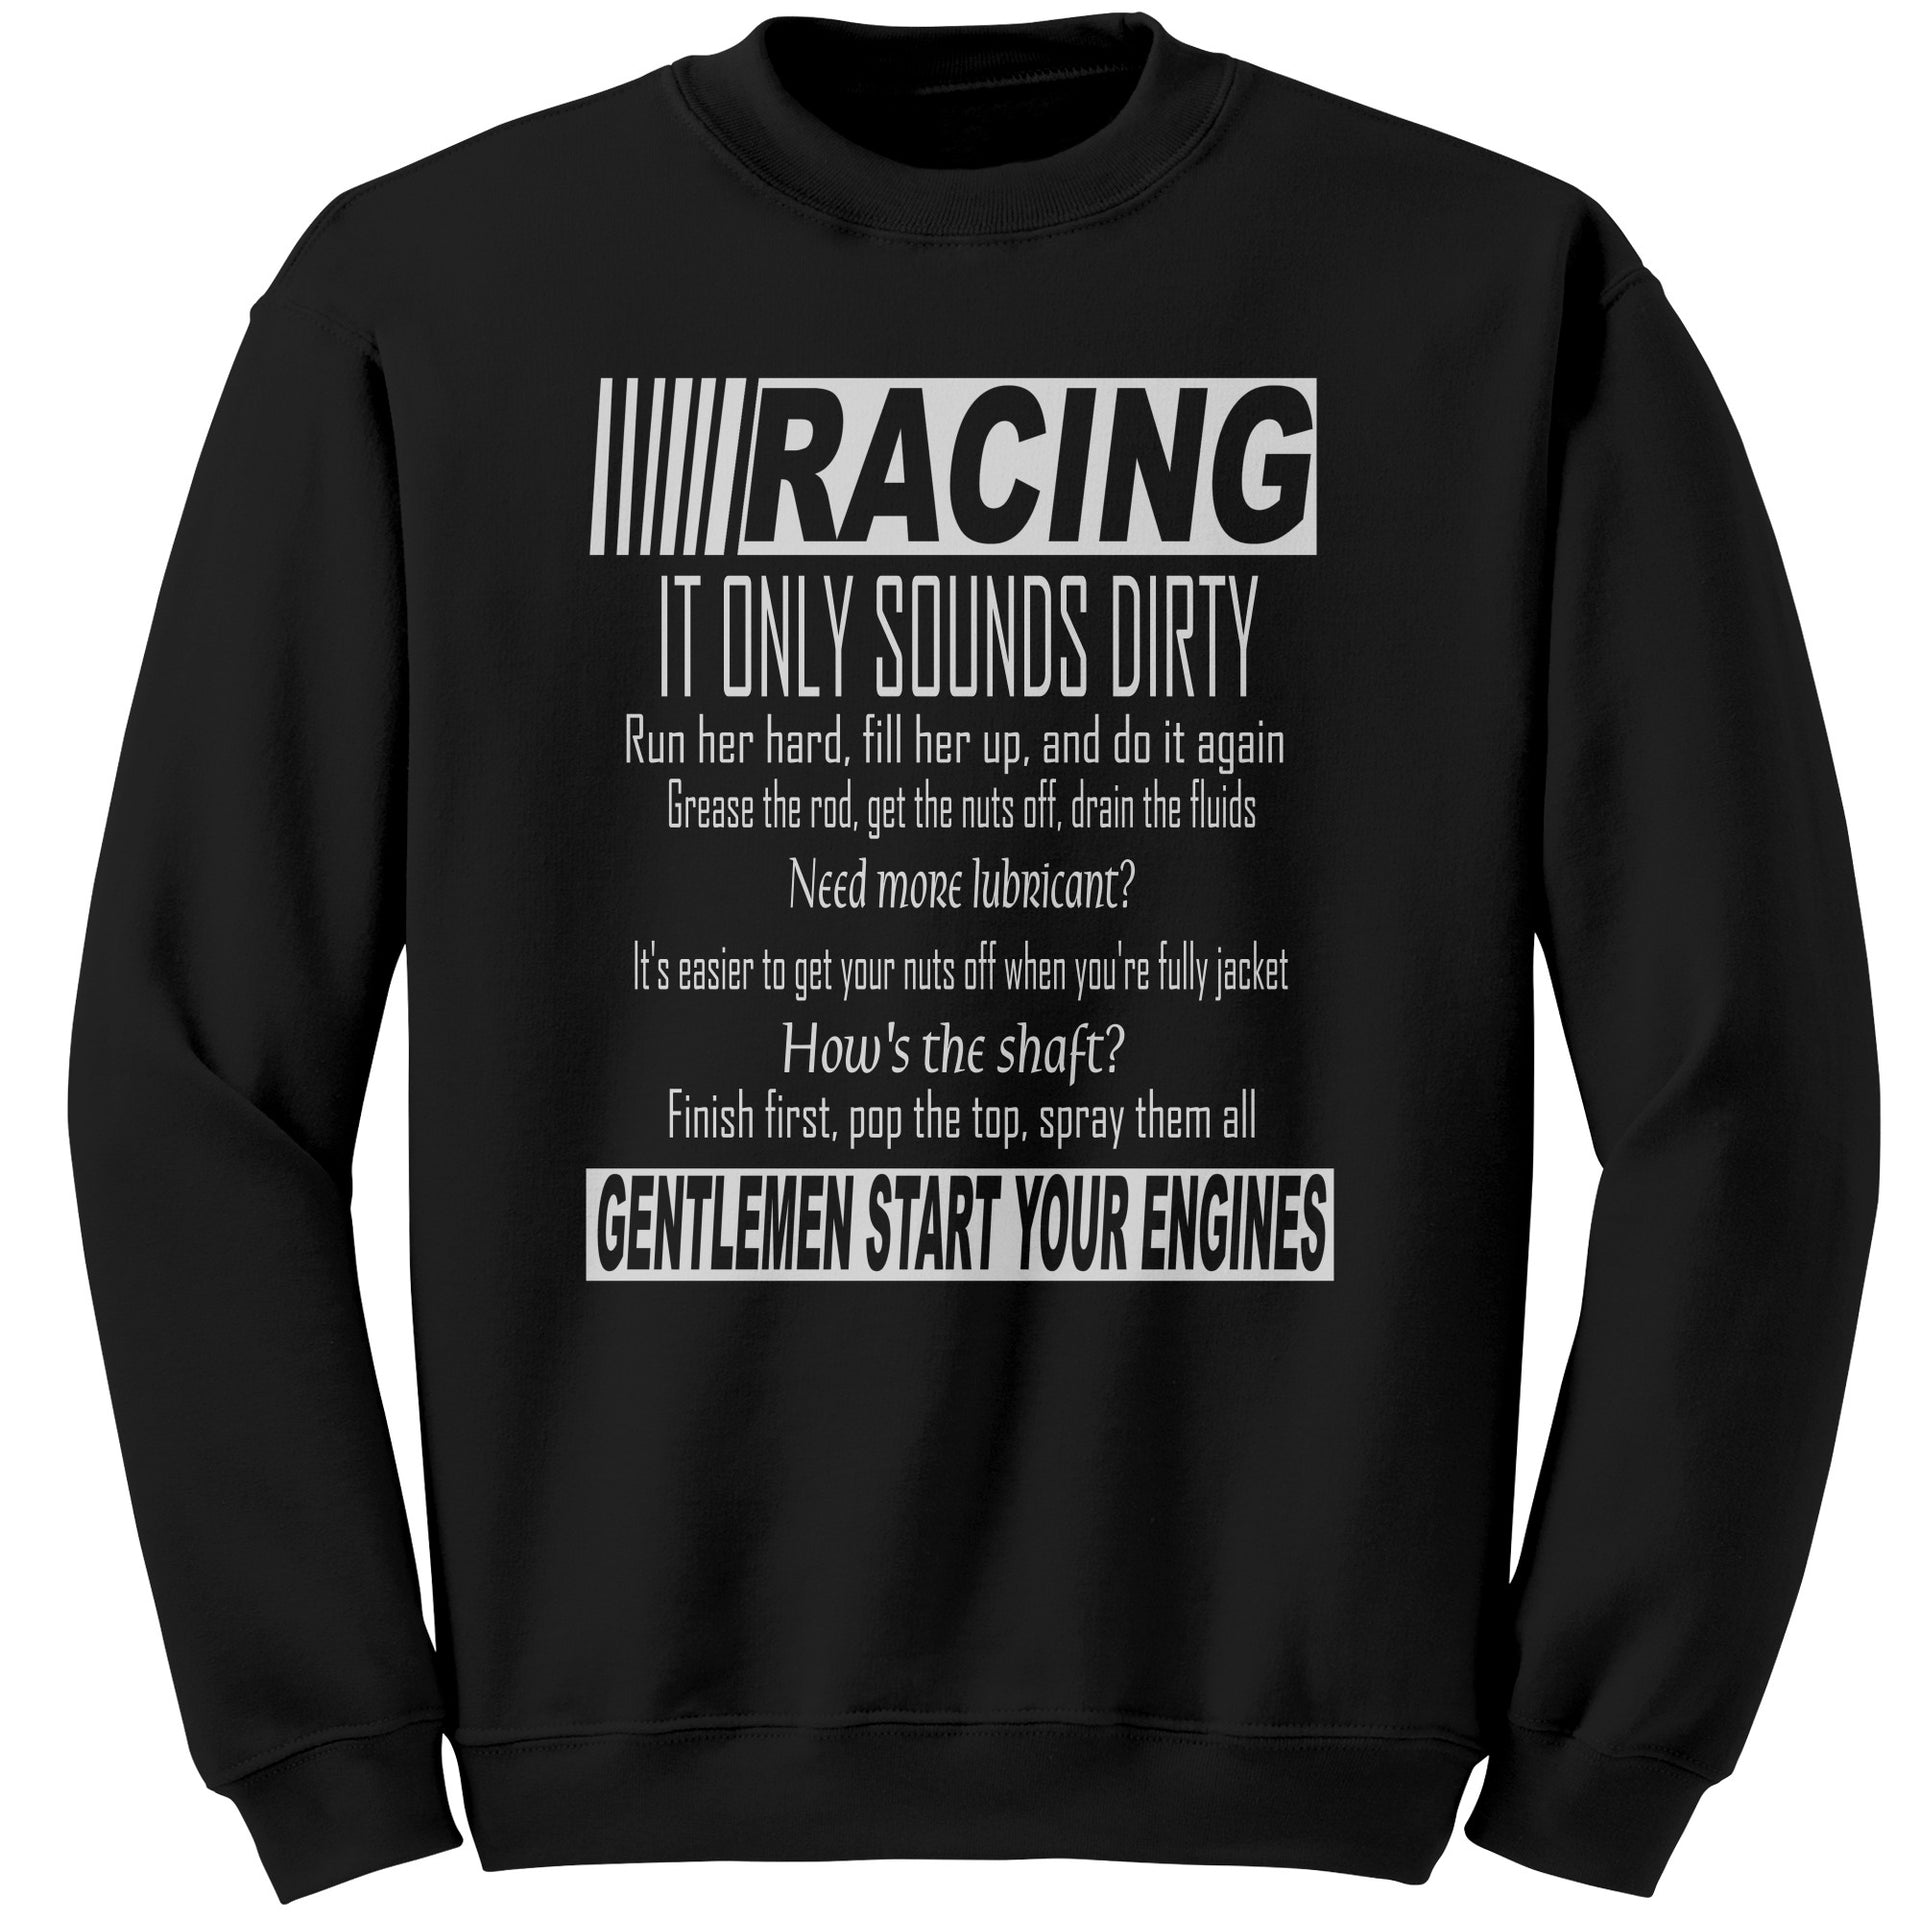 Racing It only sounds dirty Tank top